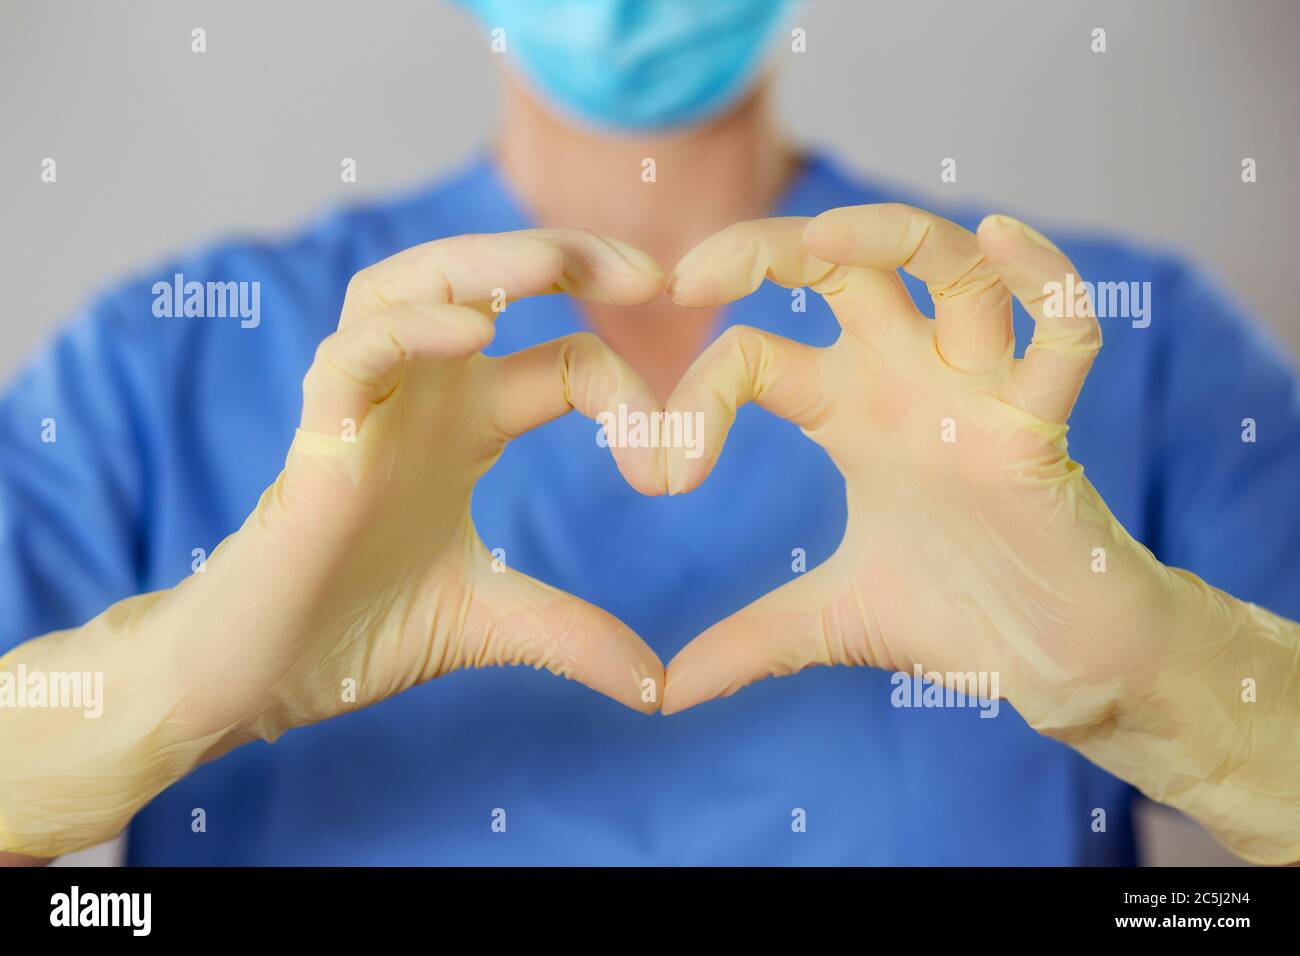 Hands in rubber gloves making the heart symbol in front of a healthcare professional in uniform. Stock Photo